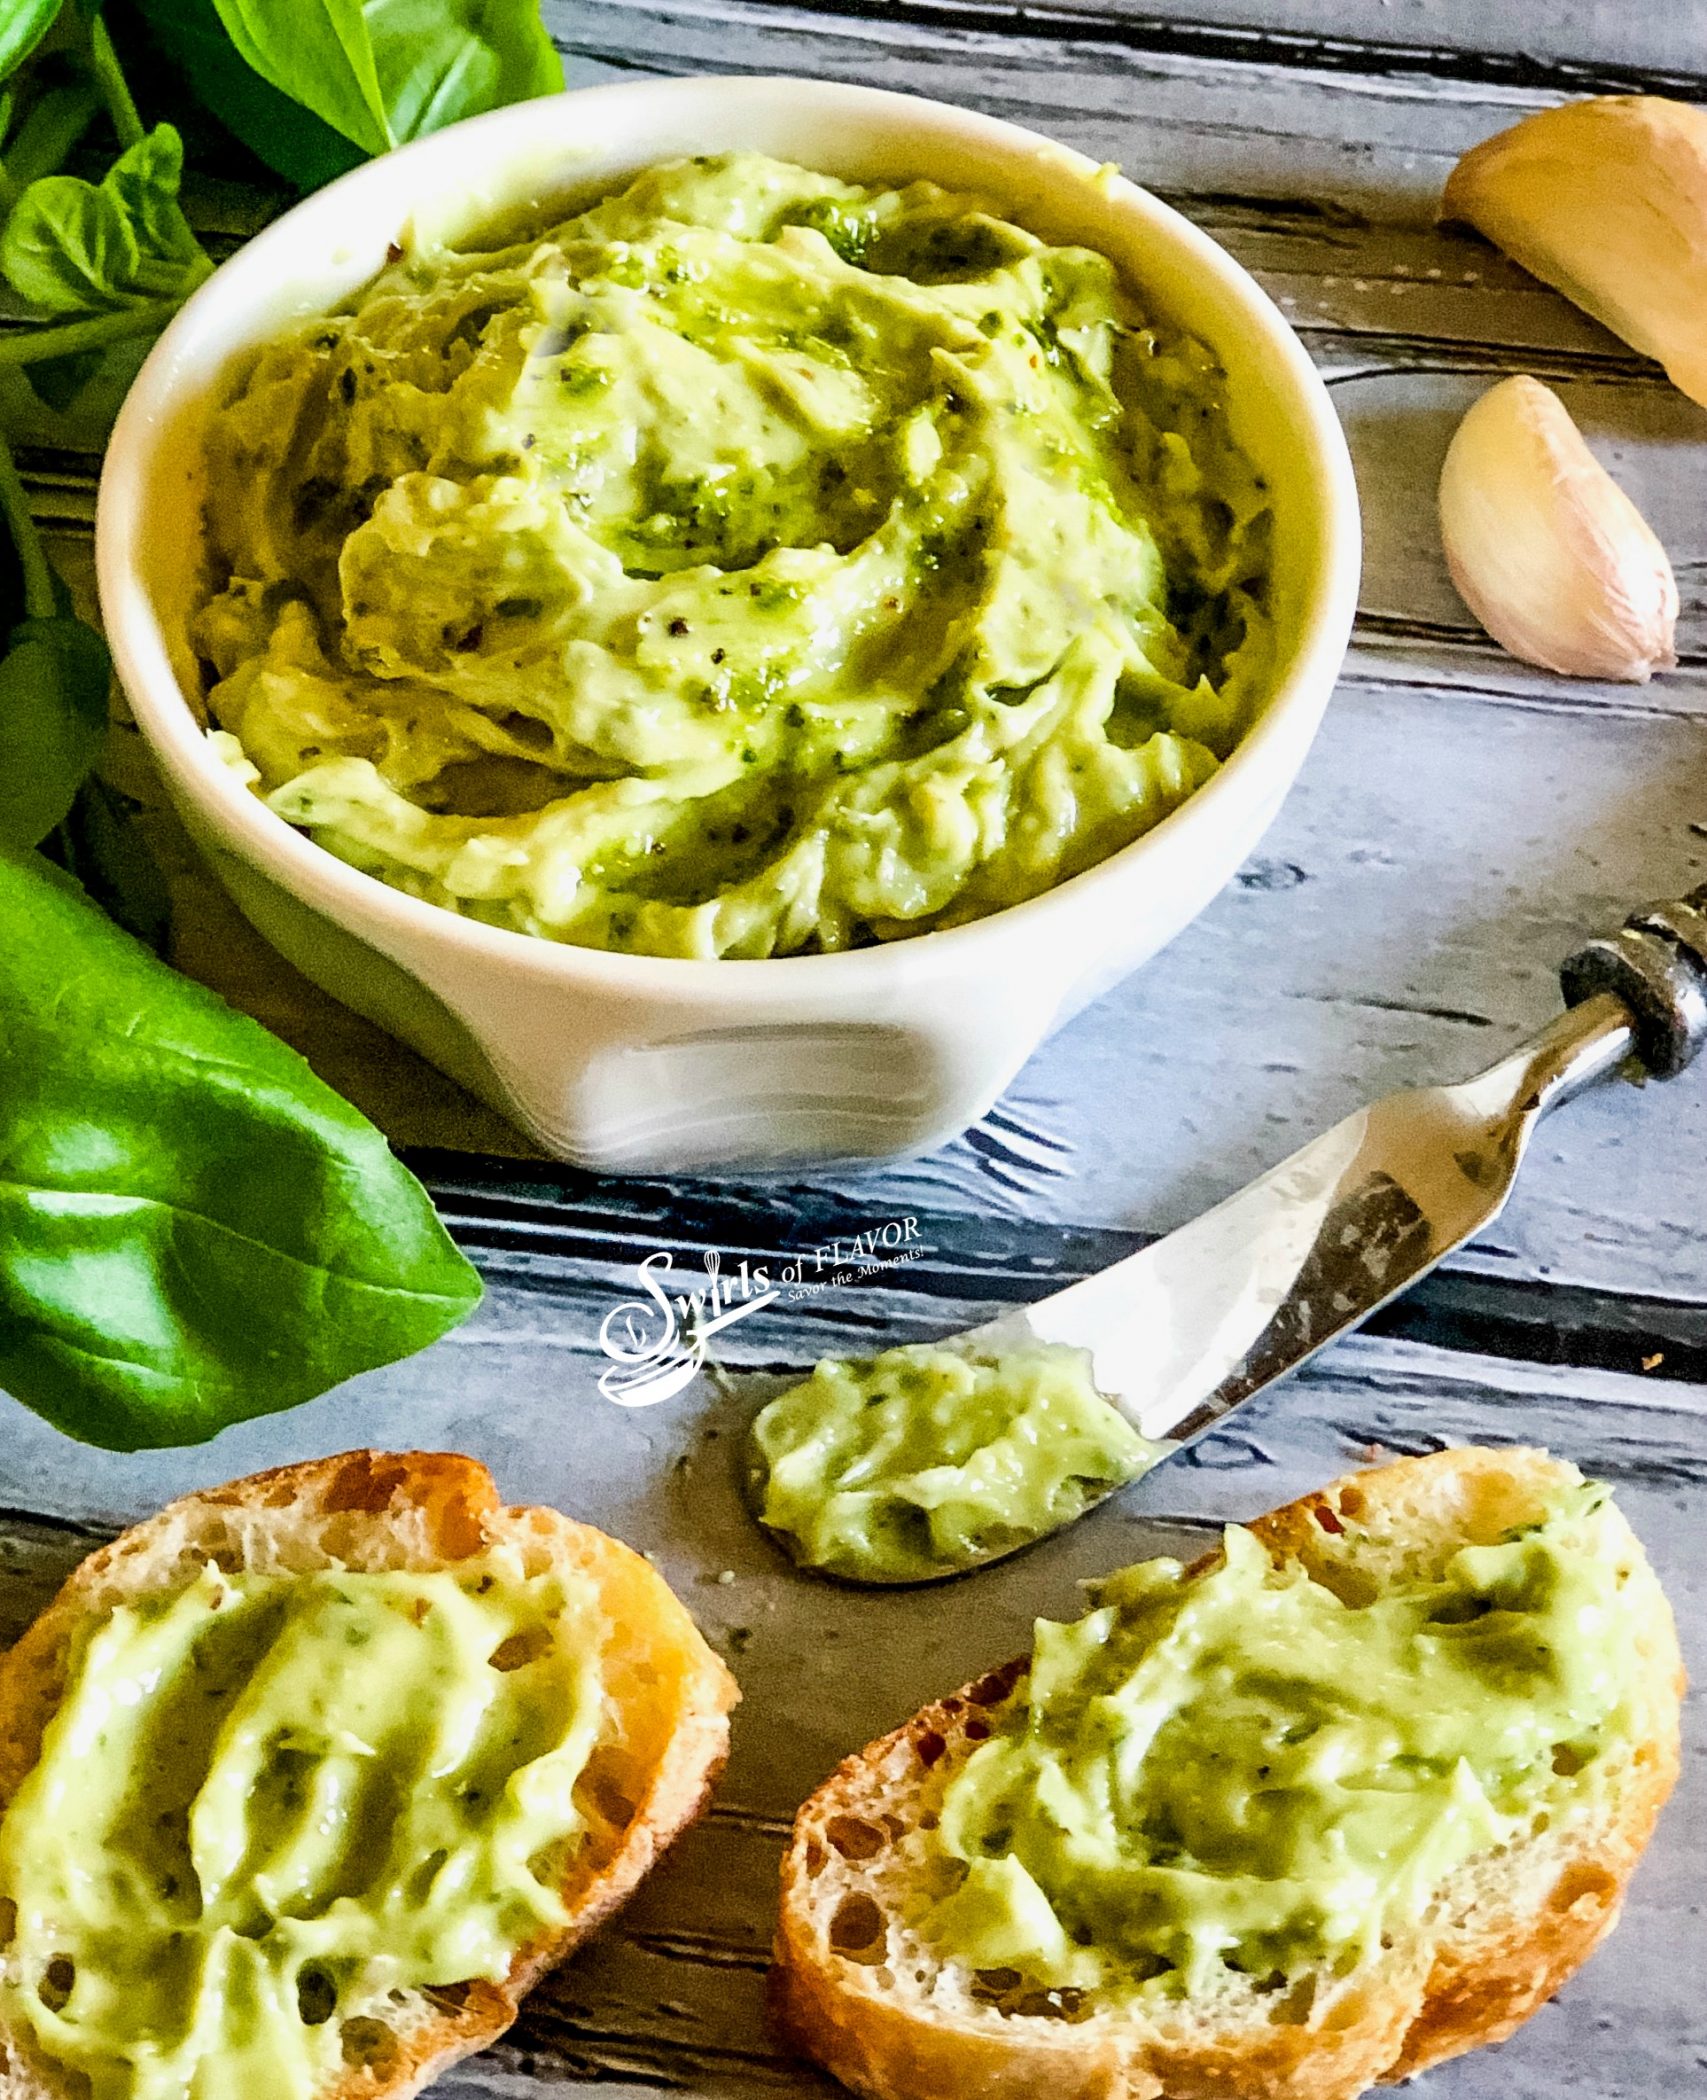 Basil Pesto Butter with knife and spread on bread